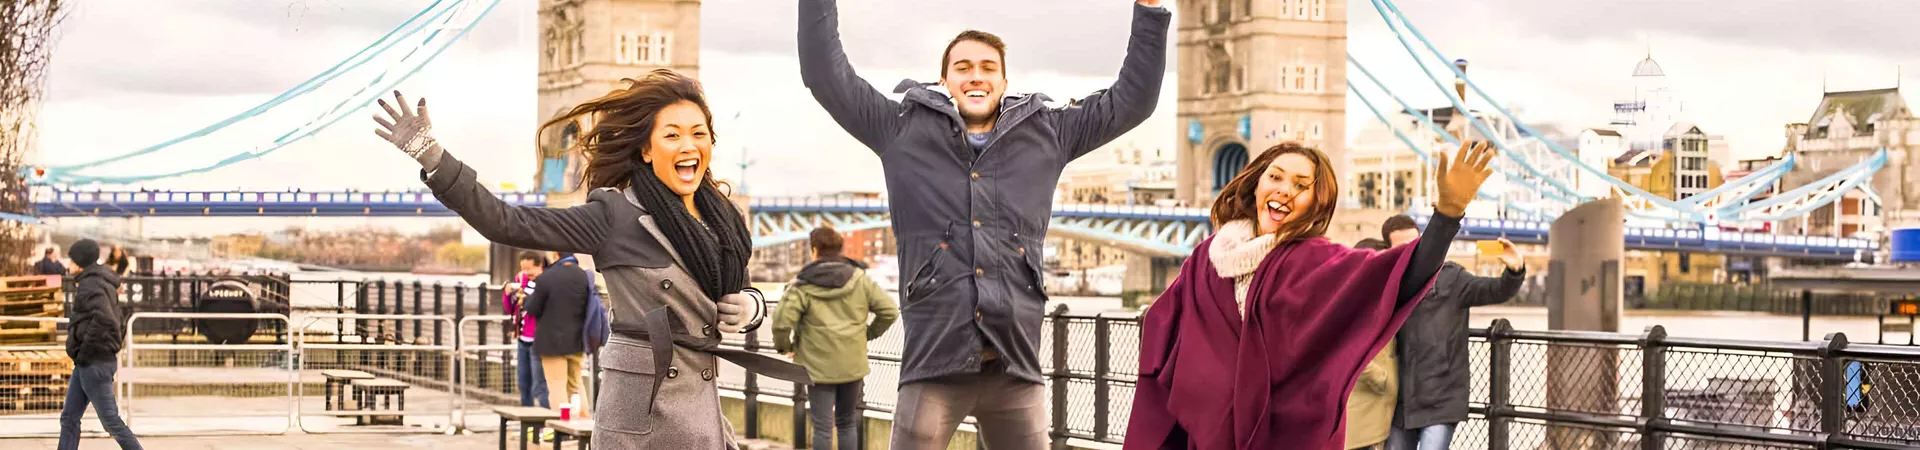 Happy Young Friends Jumping Tower Bridge Background